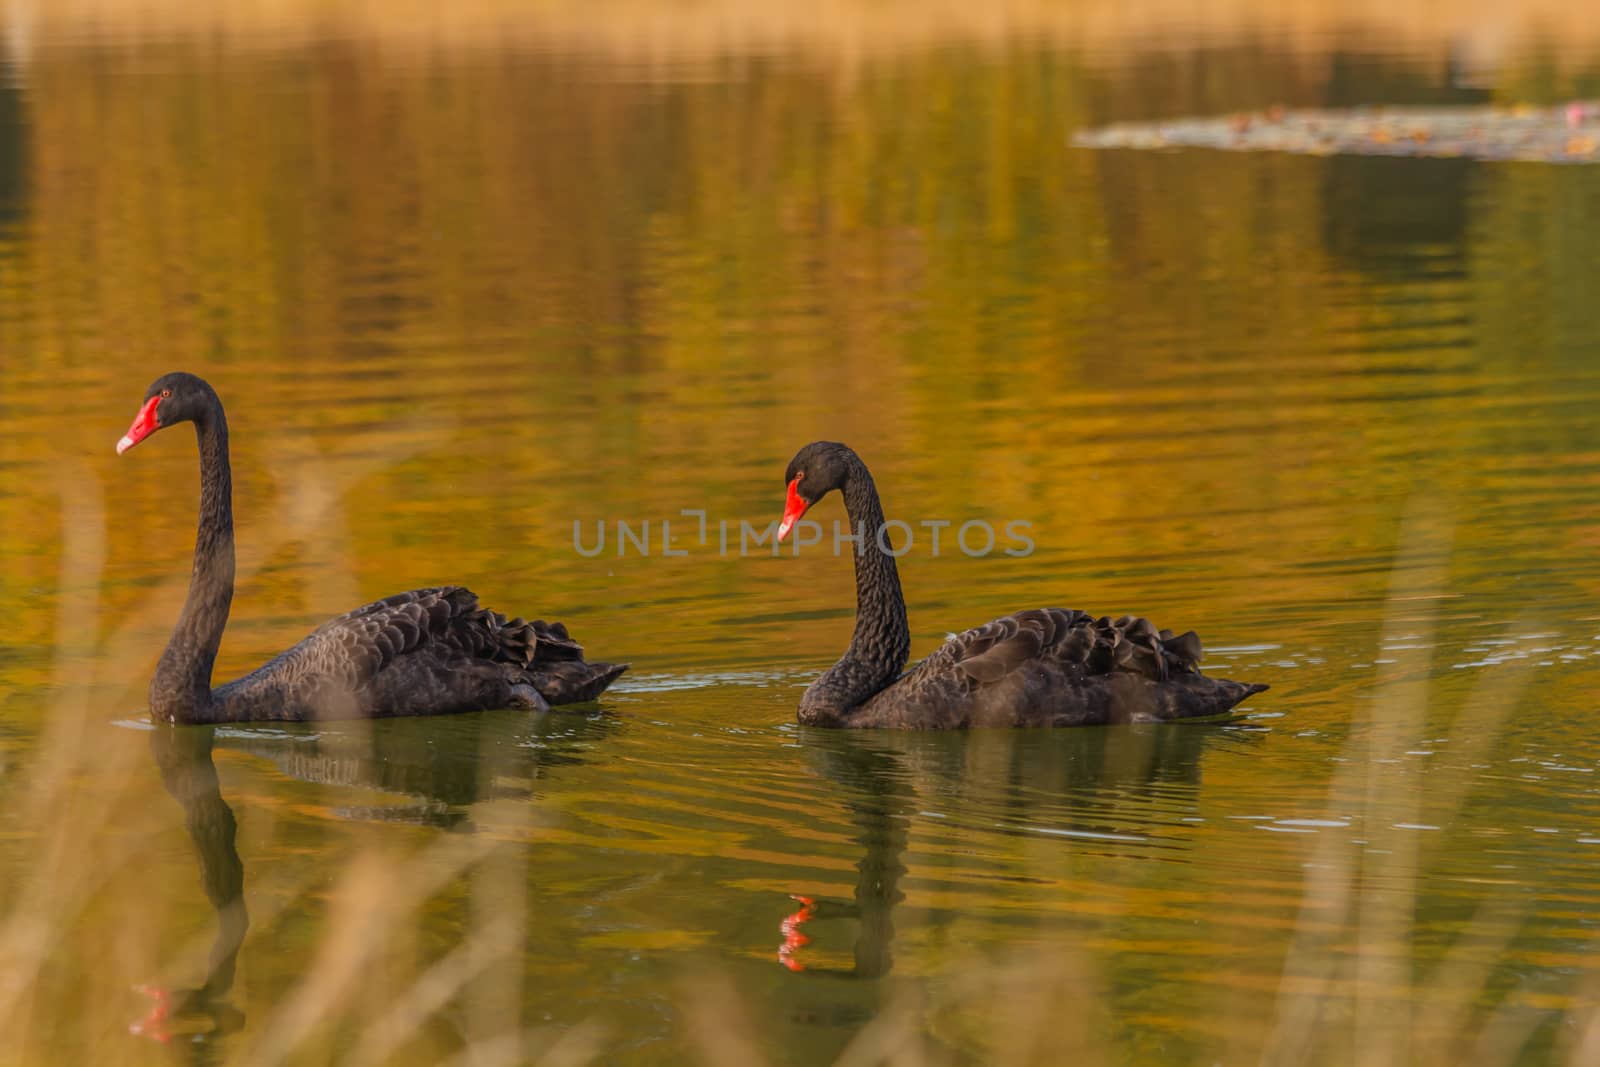 a rare exemplary of black swan exsisting in Italy by moorea